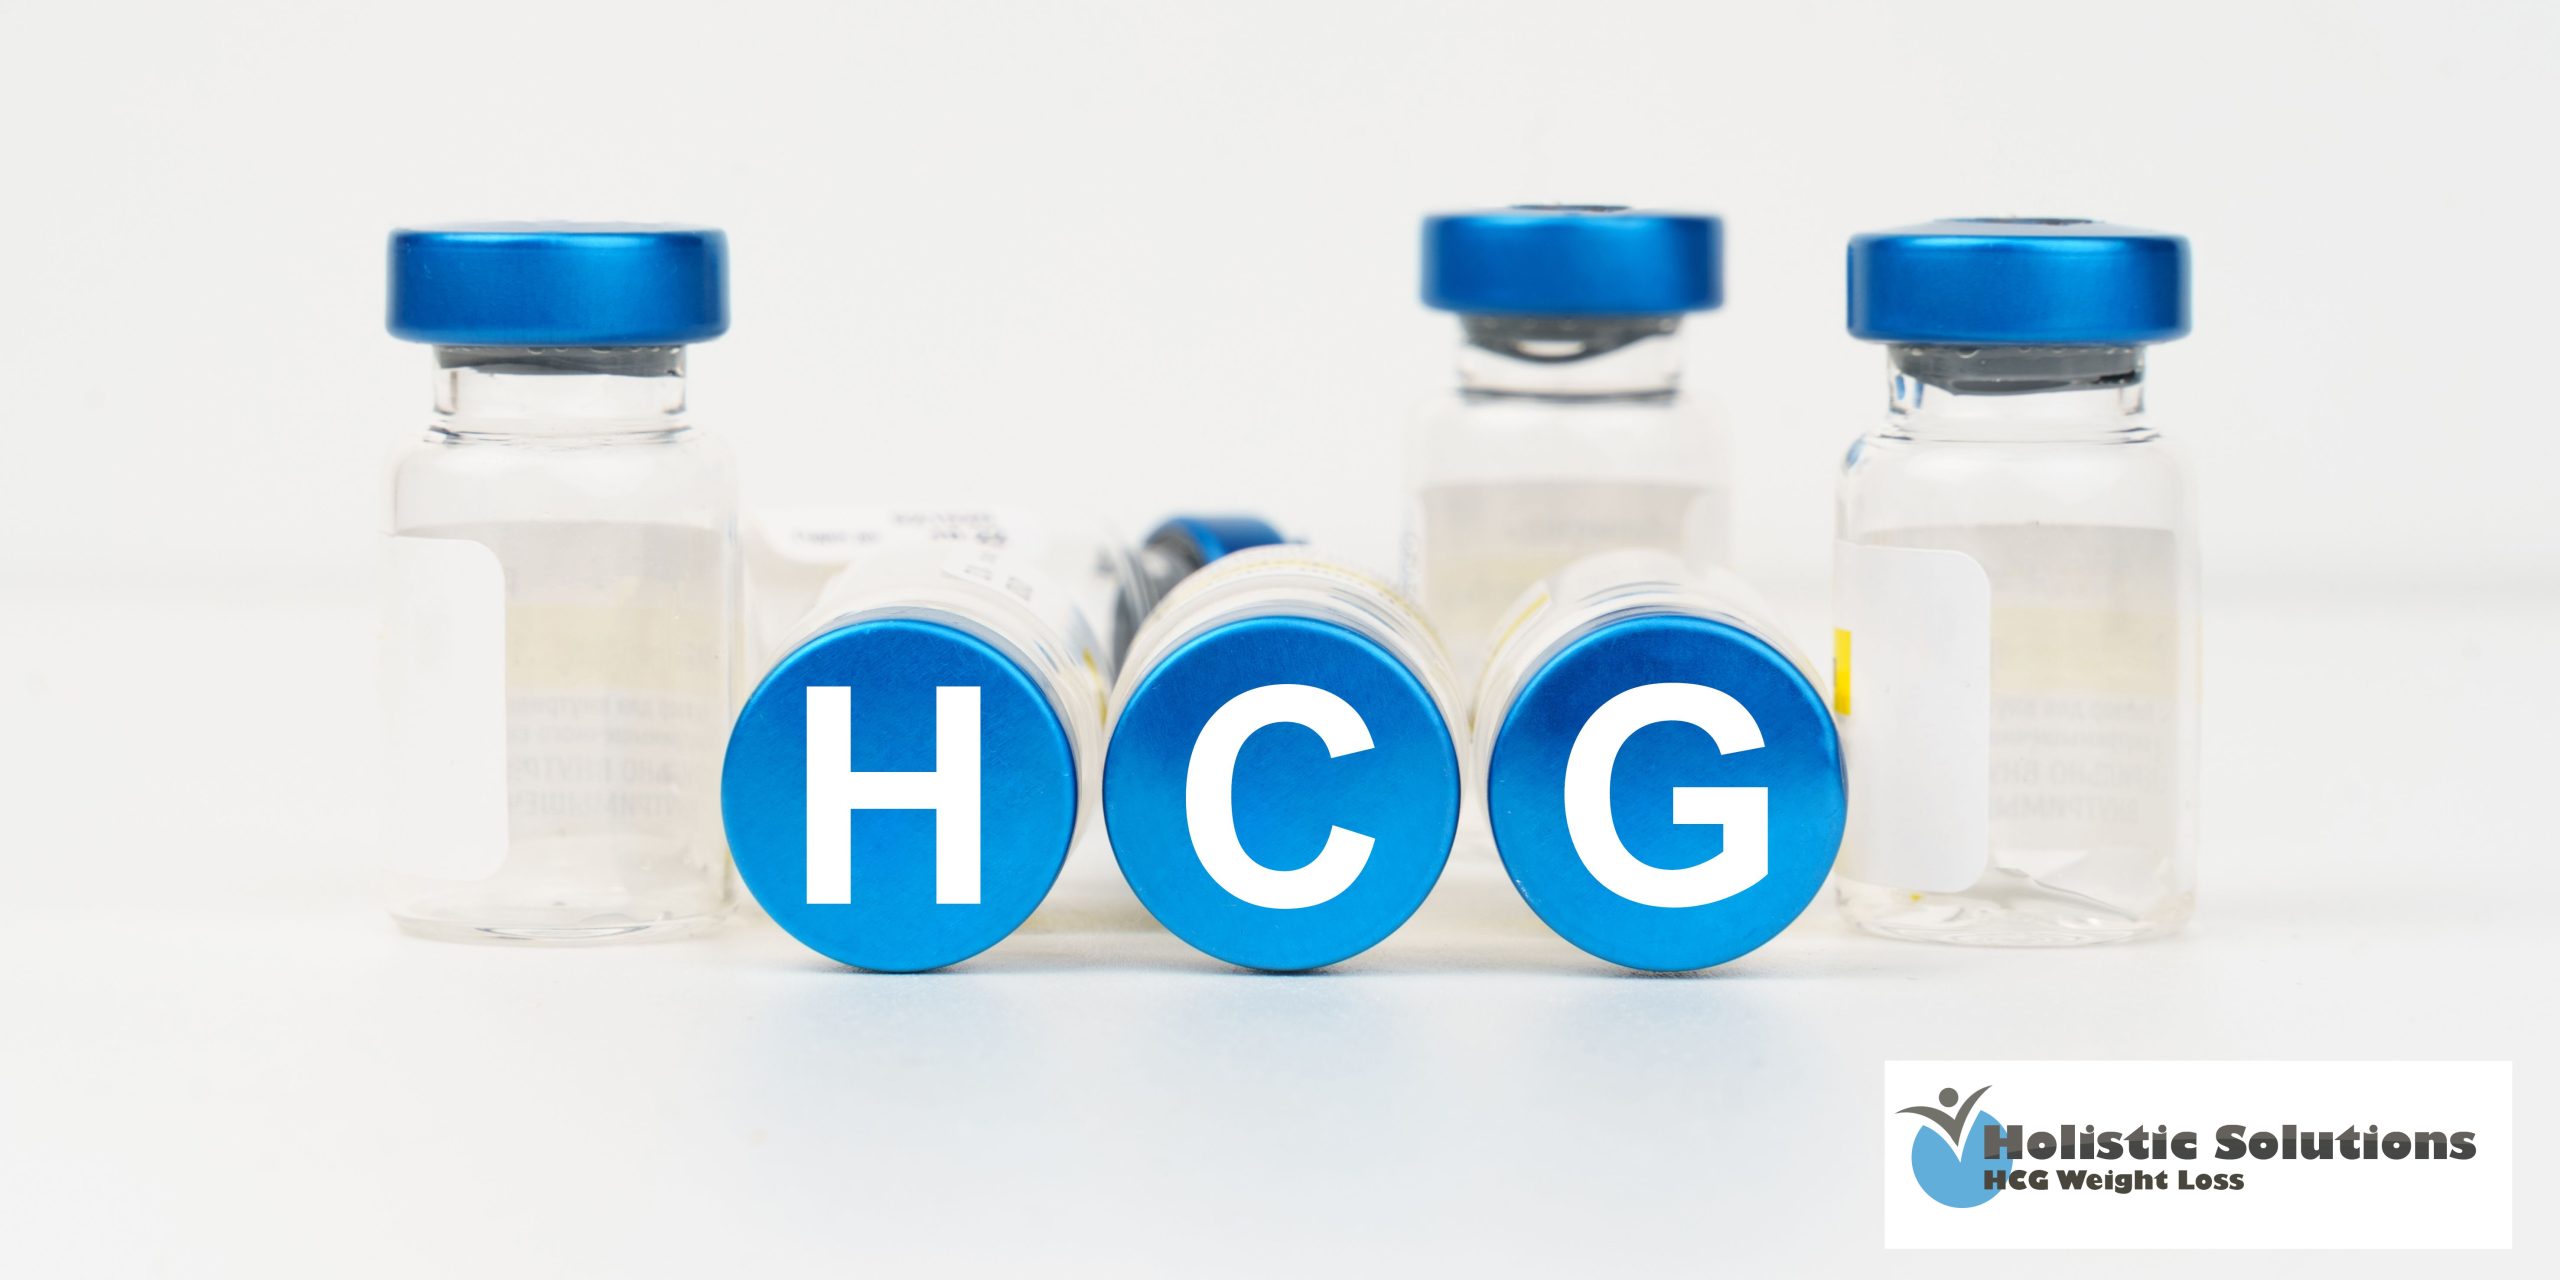 Can HCG Injections Really Help Boost Weight Loss?